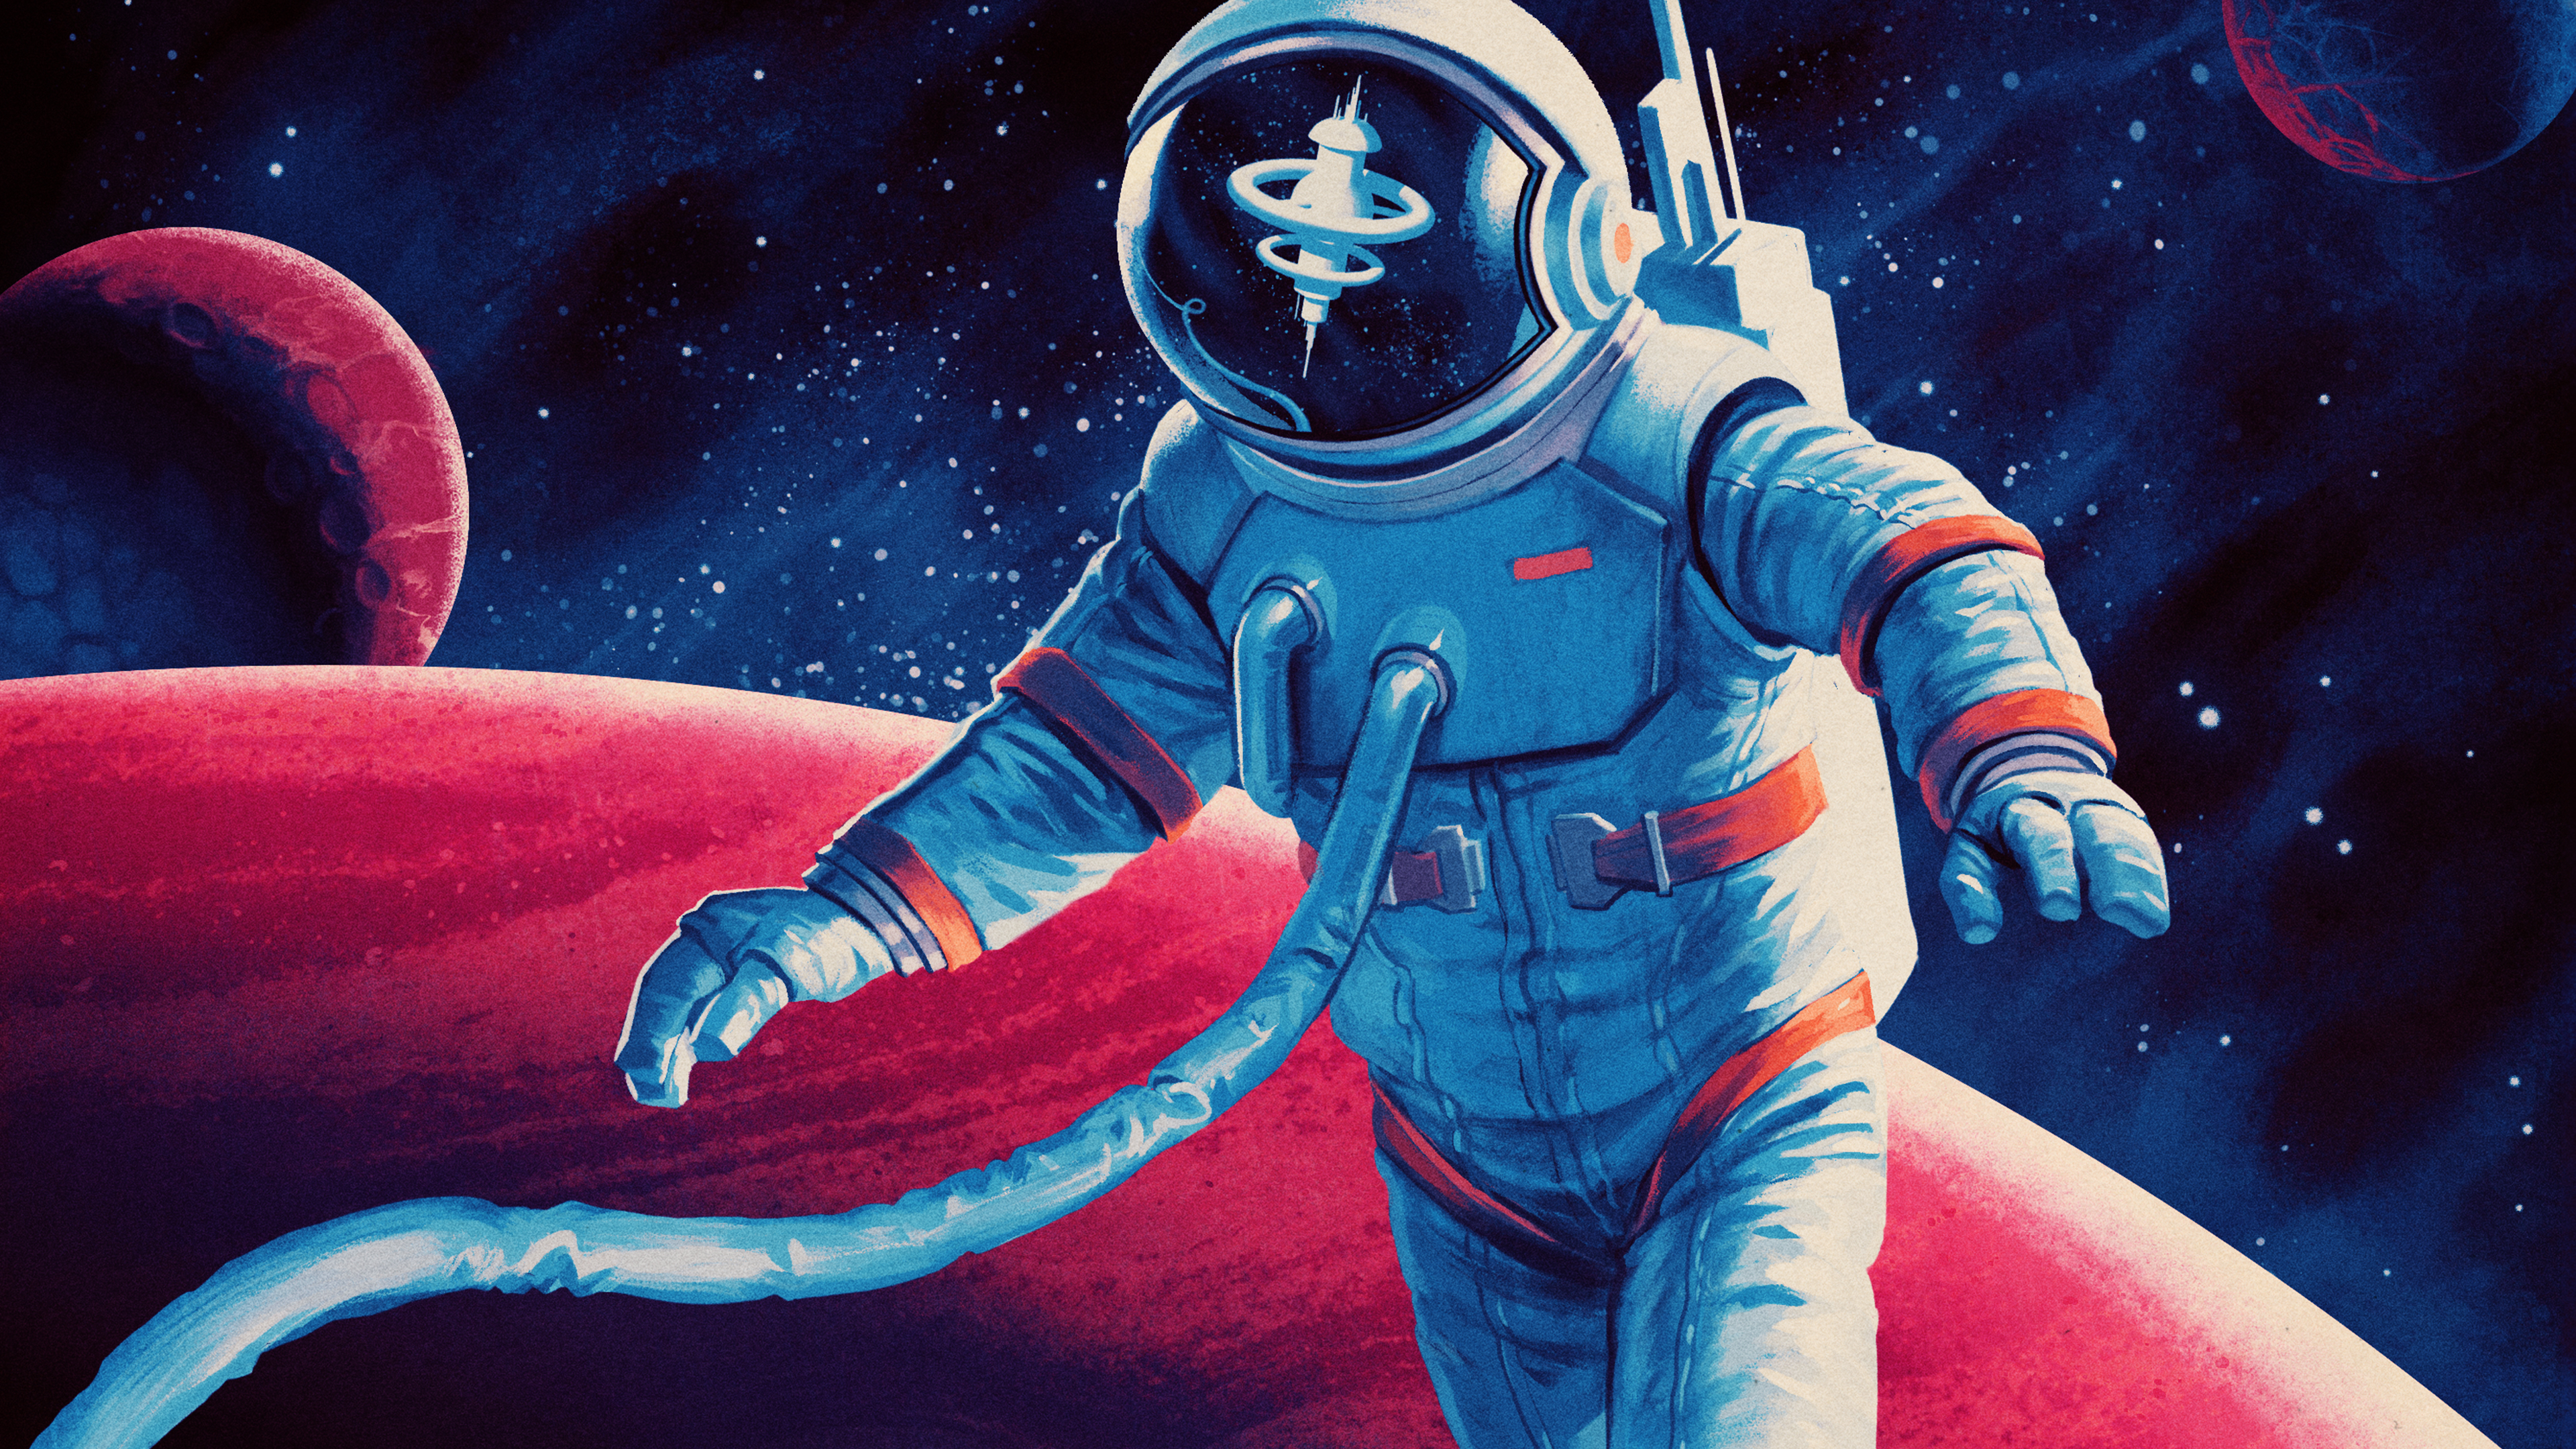 General 3840x2160 illustration science fiction retro science fiction astronaut reflection space station space planet stars Steam (software)